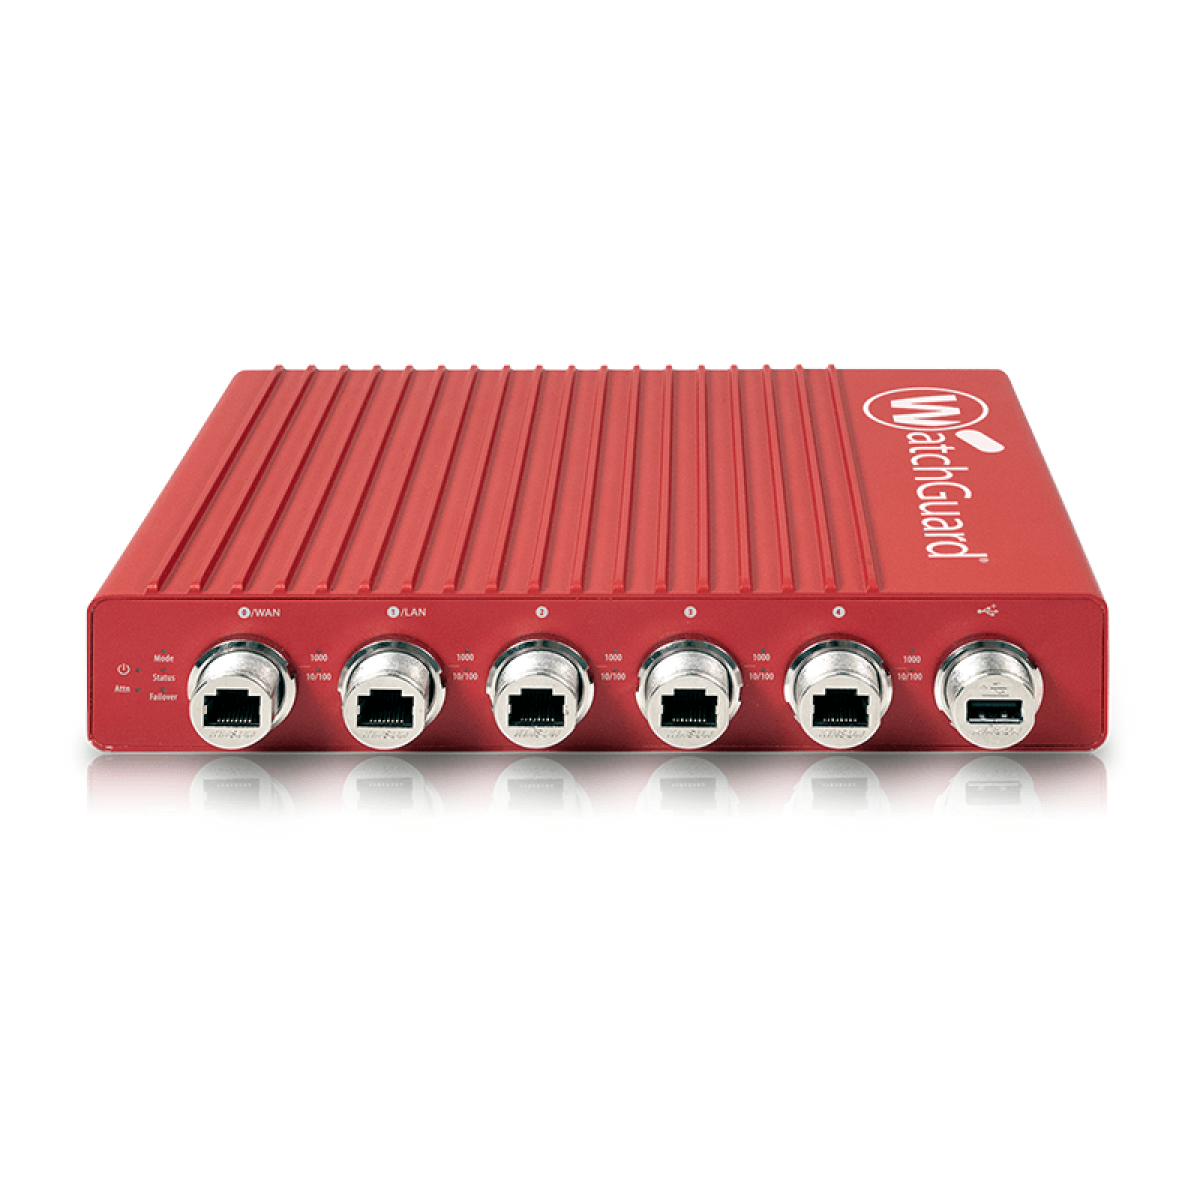 Trade up to WatchGuard Firebox T35-Rugged with 1-yr Basic Security